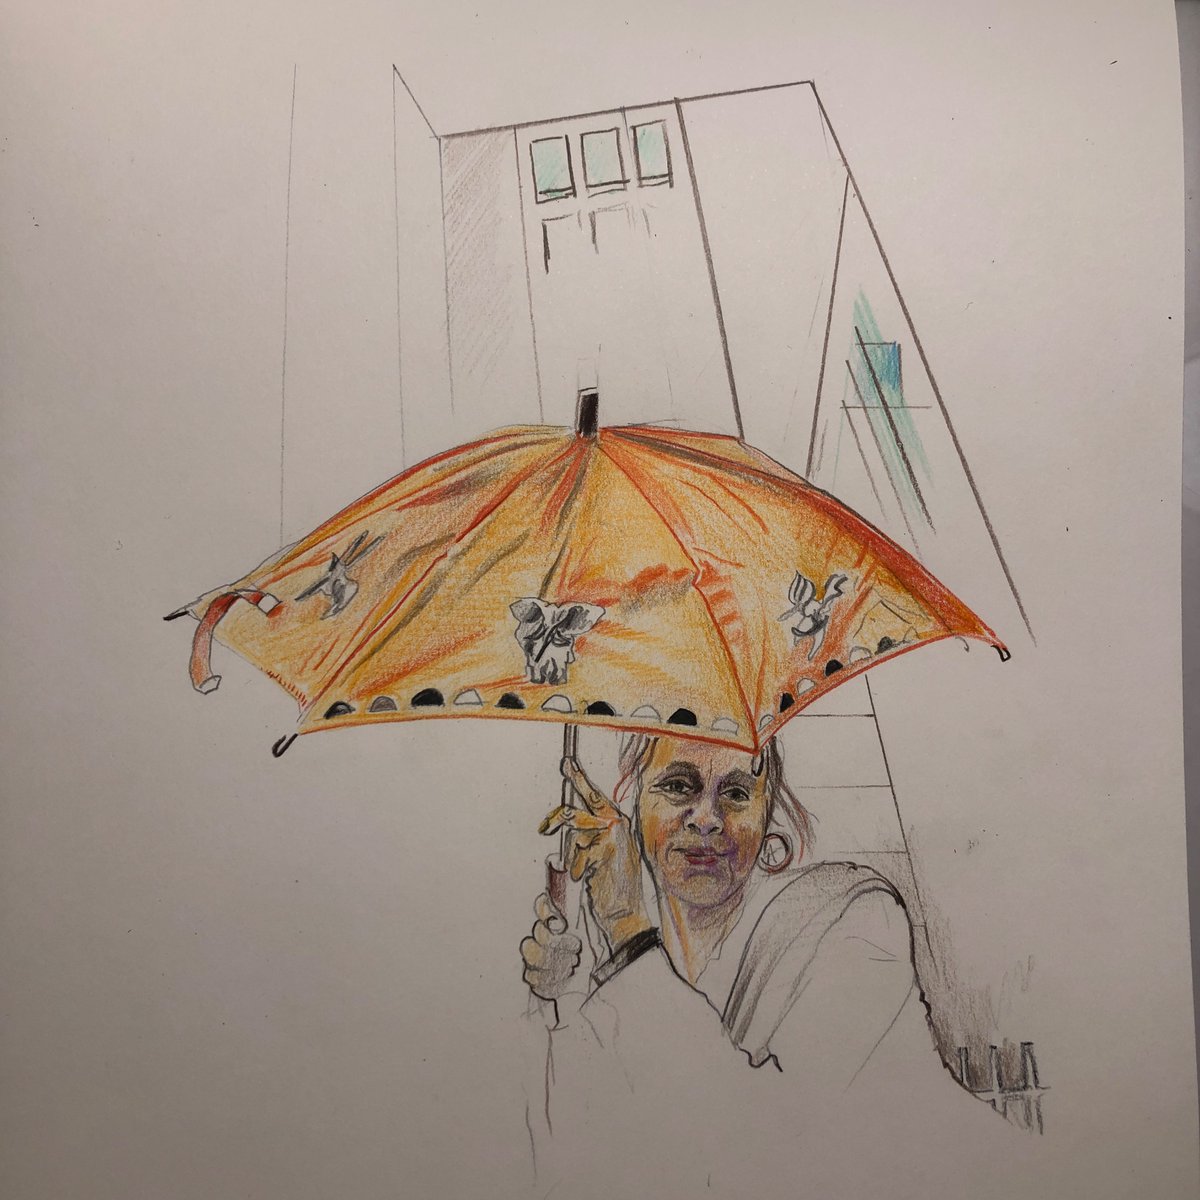 Woman with orange umbrella Listening to @marcrileydj and enjoying mad session from @FatWhiteFamily Also music by @vic_godard and Little Storping in the Swuff, have gigged with both superstars, and @mglaspy Good show as always